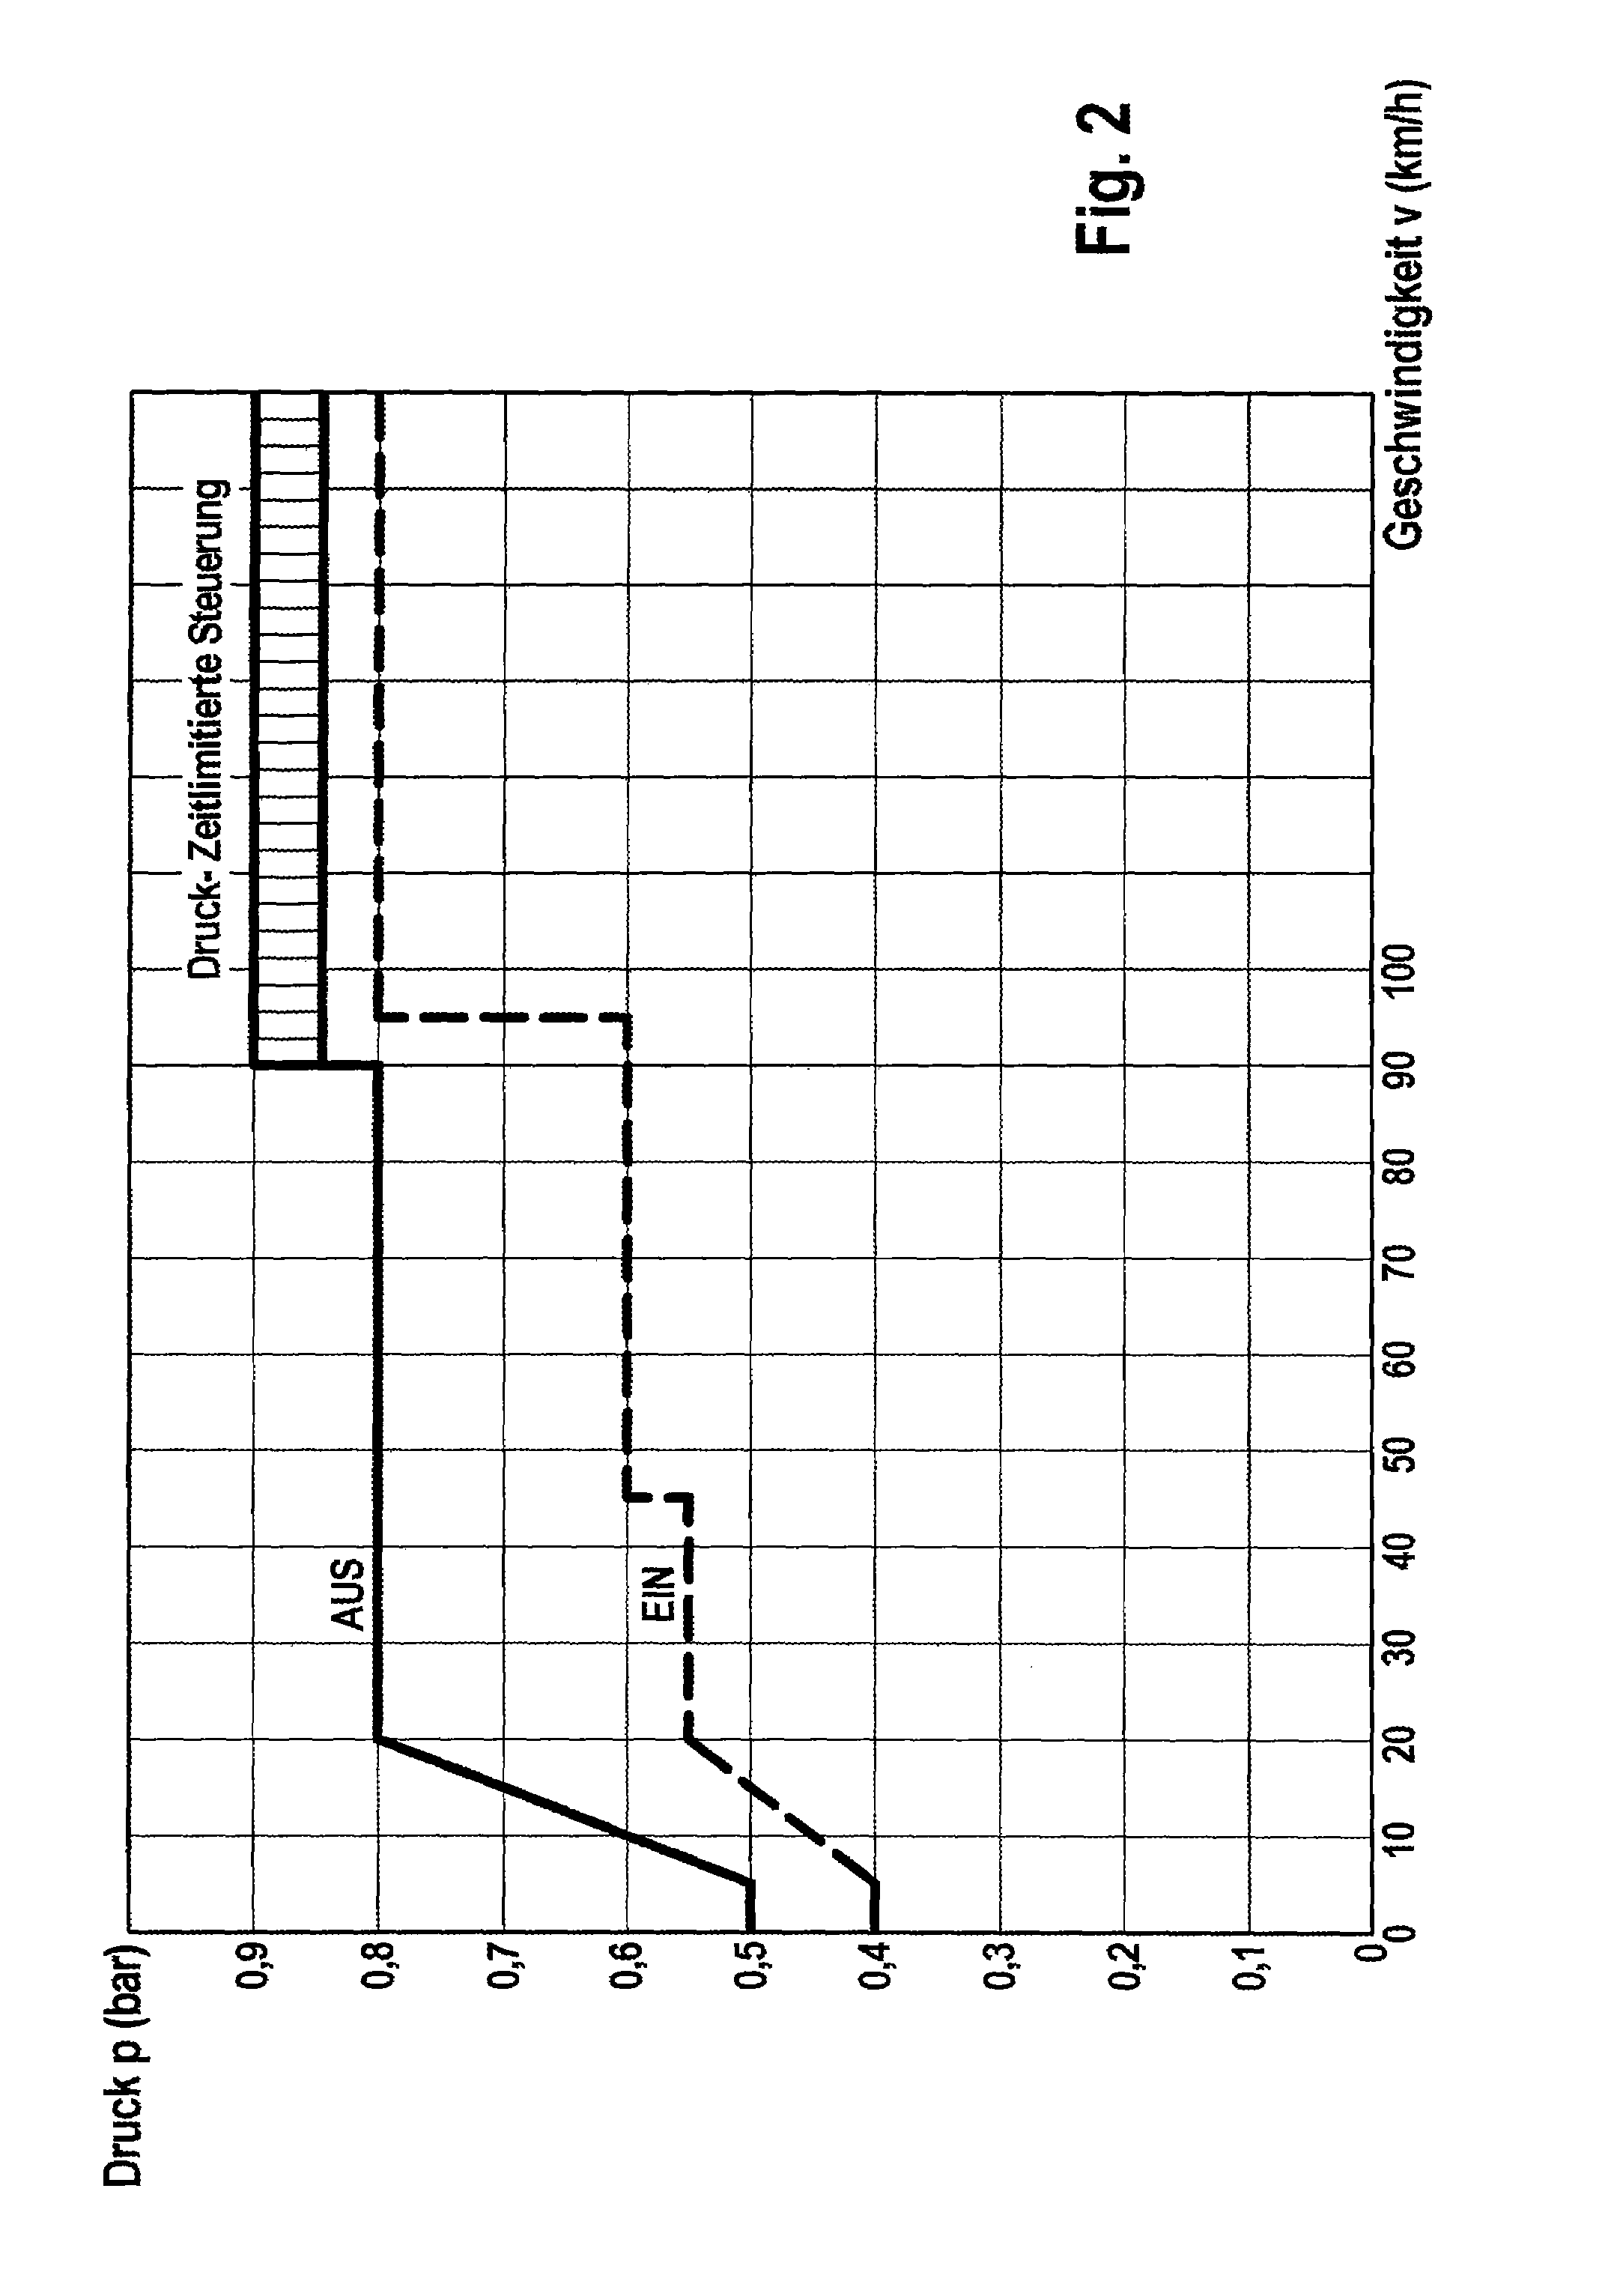 Method for Creating Low Pressure In A Brake Activation Device of a Motor Vehicle Brake System